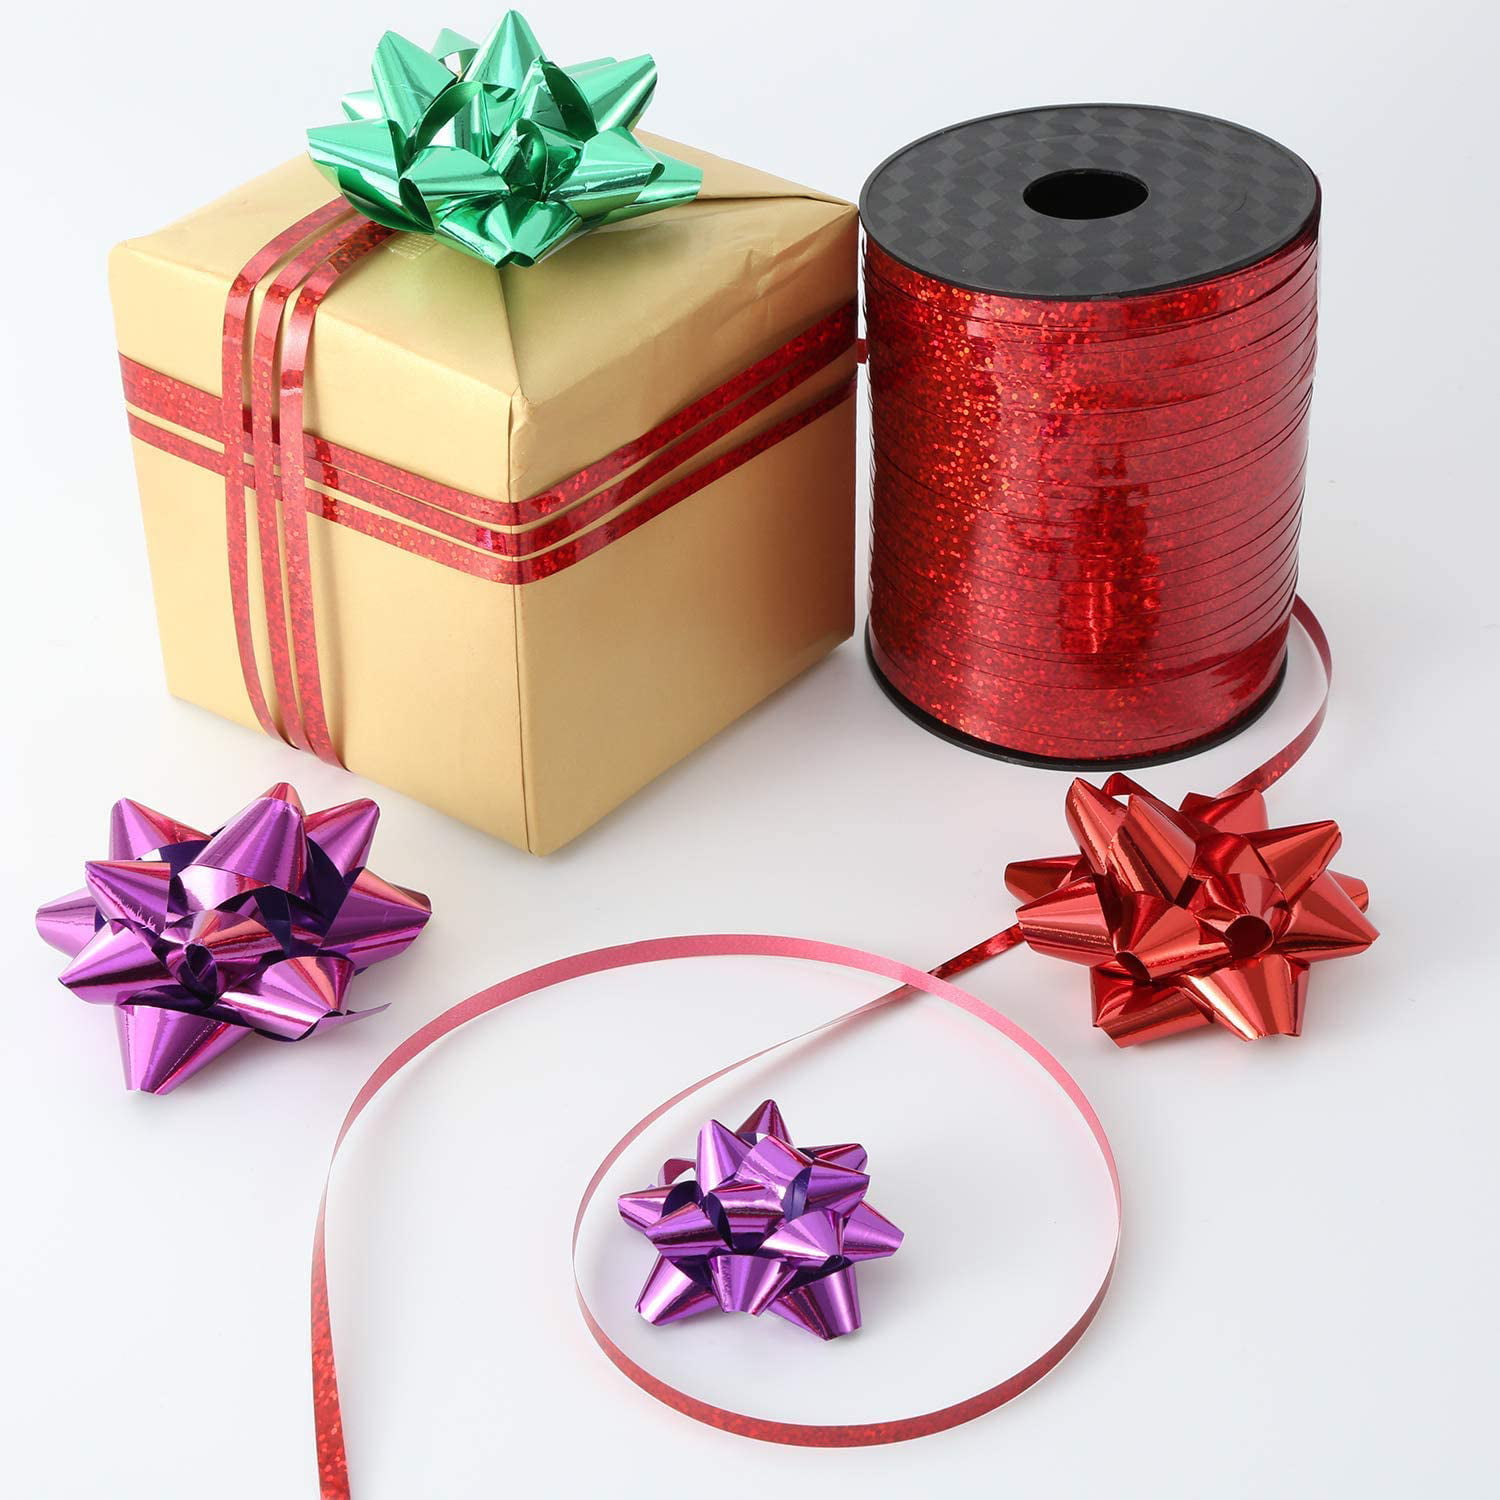 PMU Curling Ribbon - Crimped Texture Curling Ribbons for Gift Box Wrapping,  Florist Flowers, Birthday Party Decorations, Festival Art Craft & Christmas  Décor - Red 3/16 Inch X 500 Yards, Pkg/1 